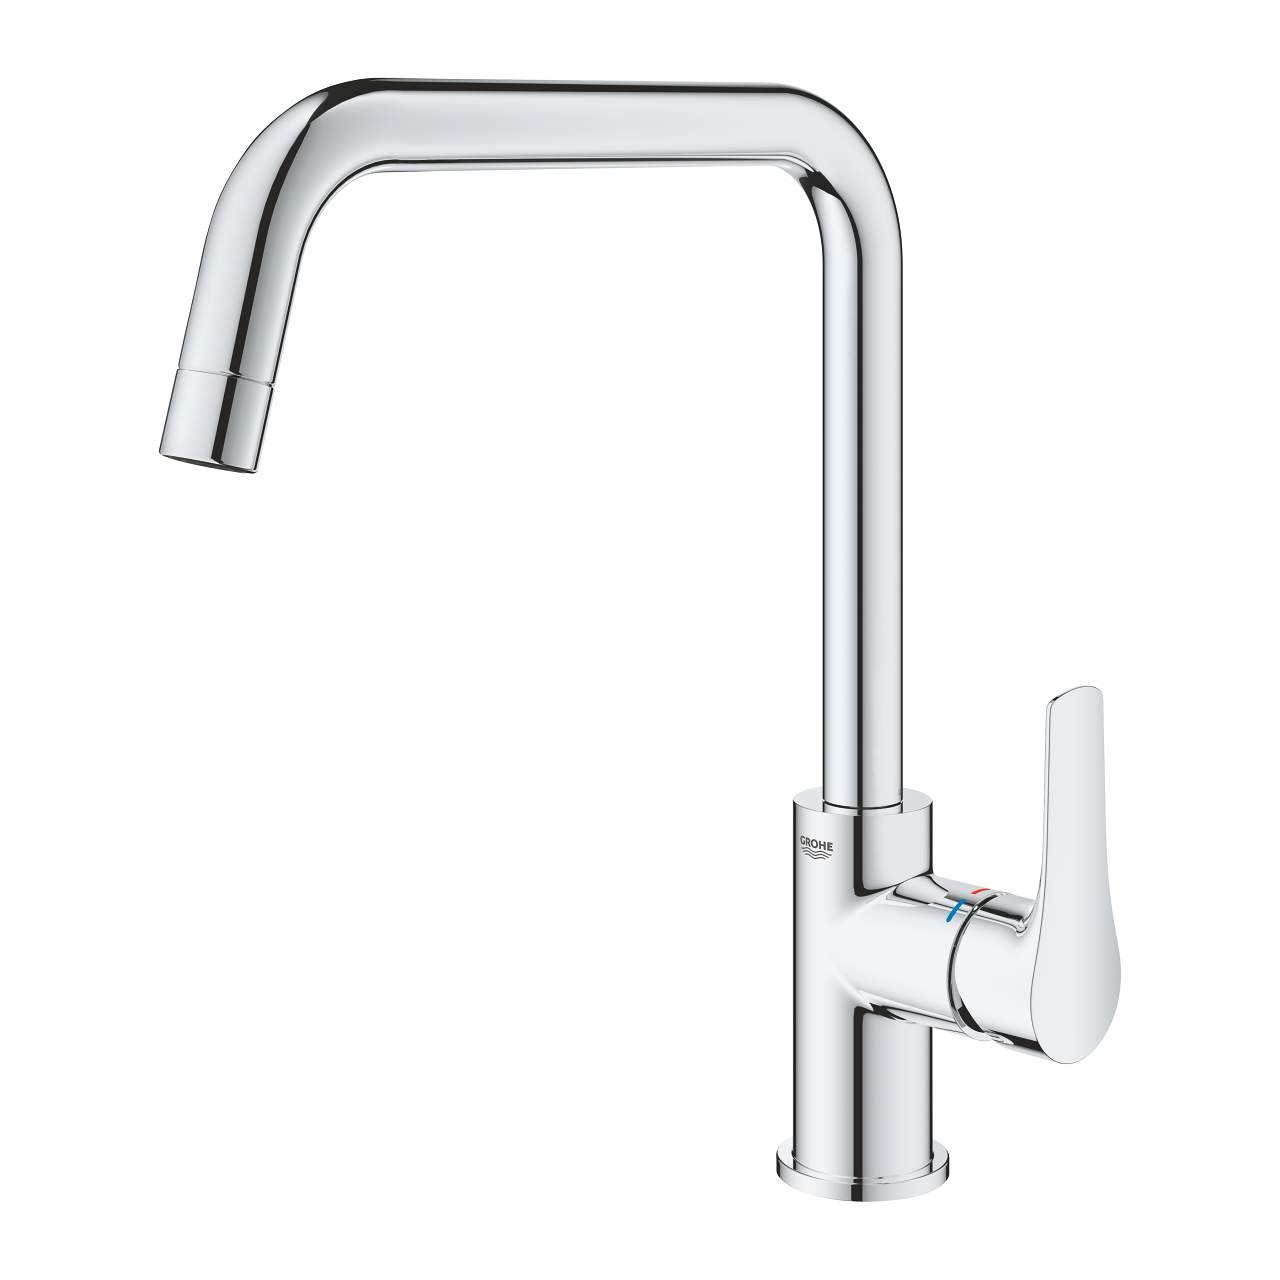  Grohe EUROSMART single lever sink mixer with high U-shaped spout